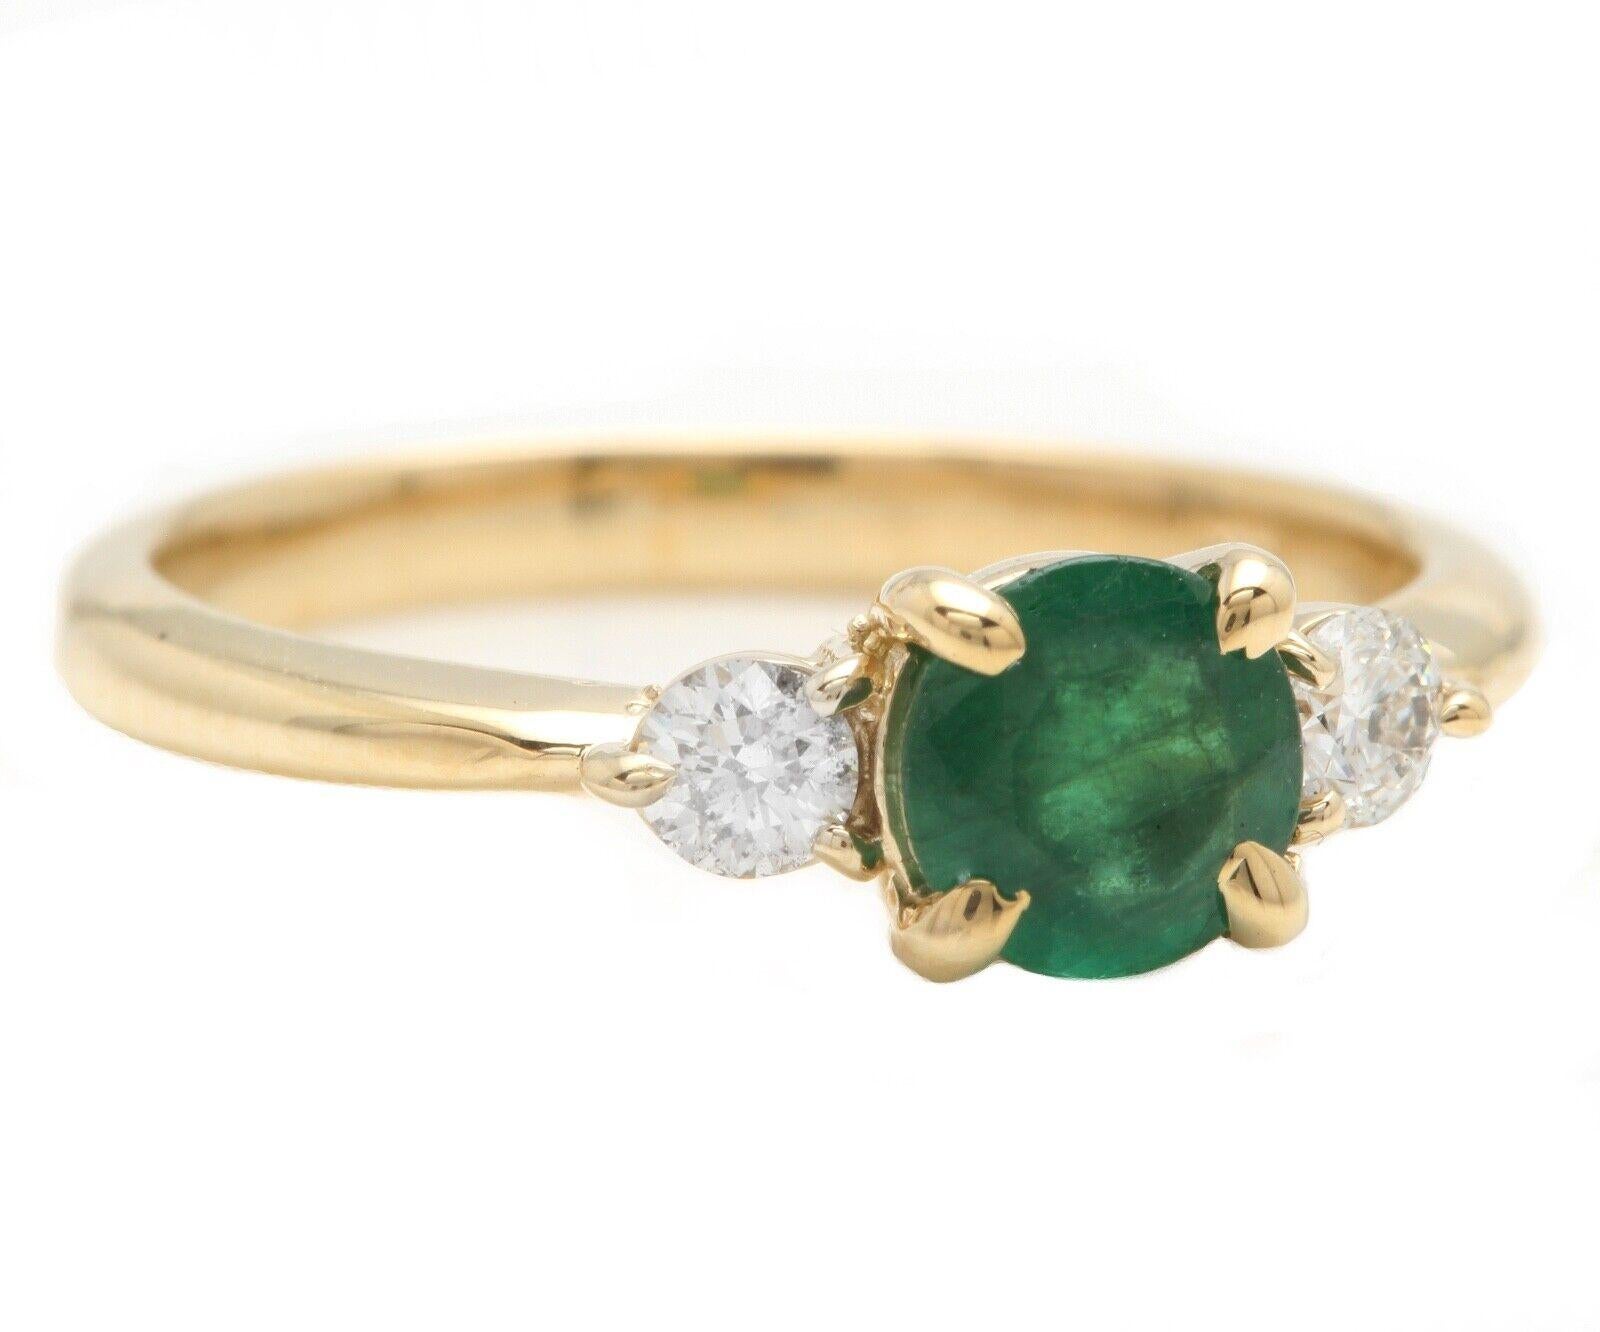 Stunning Natural Emerald and Diamond 14K Solid Yellow Gold Ring

Suggested Replacement Value: $3,500.00

Total Natural Green Emerald Weight is: Approx. 0.60 Carats (transparent)

Natural Round Diamonds Weight: Approx. 0.18 Carats (color G-H /